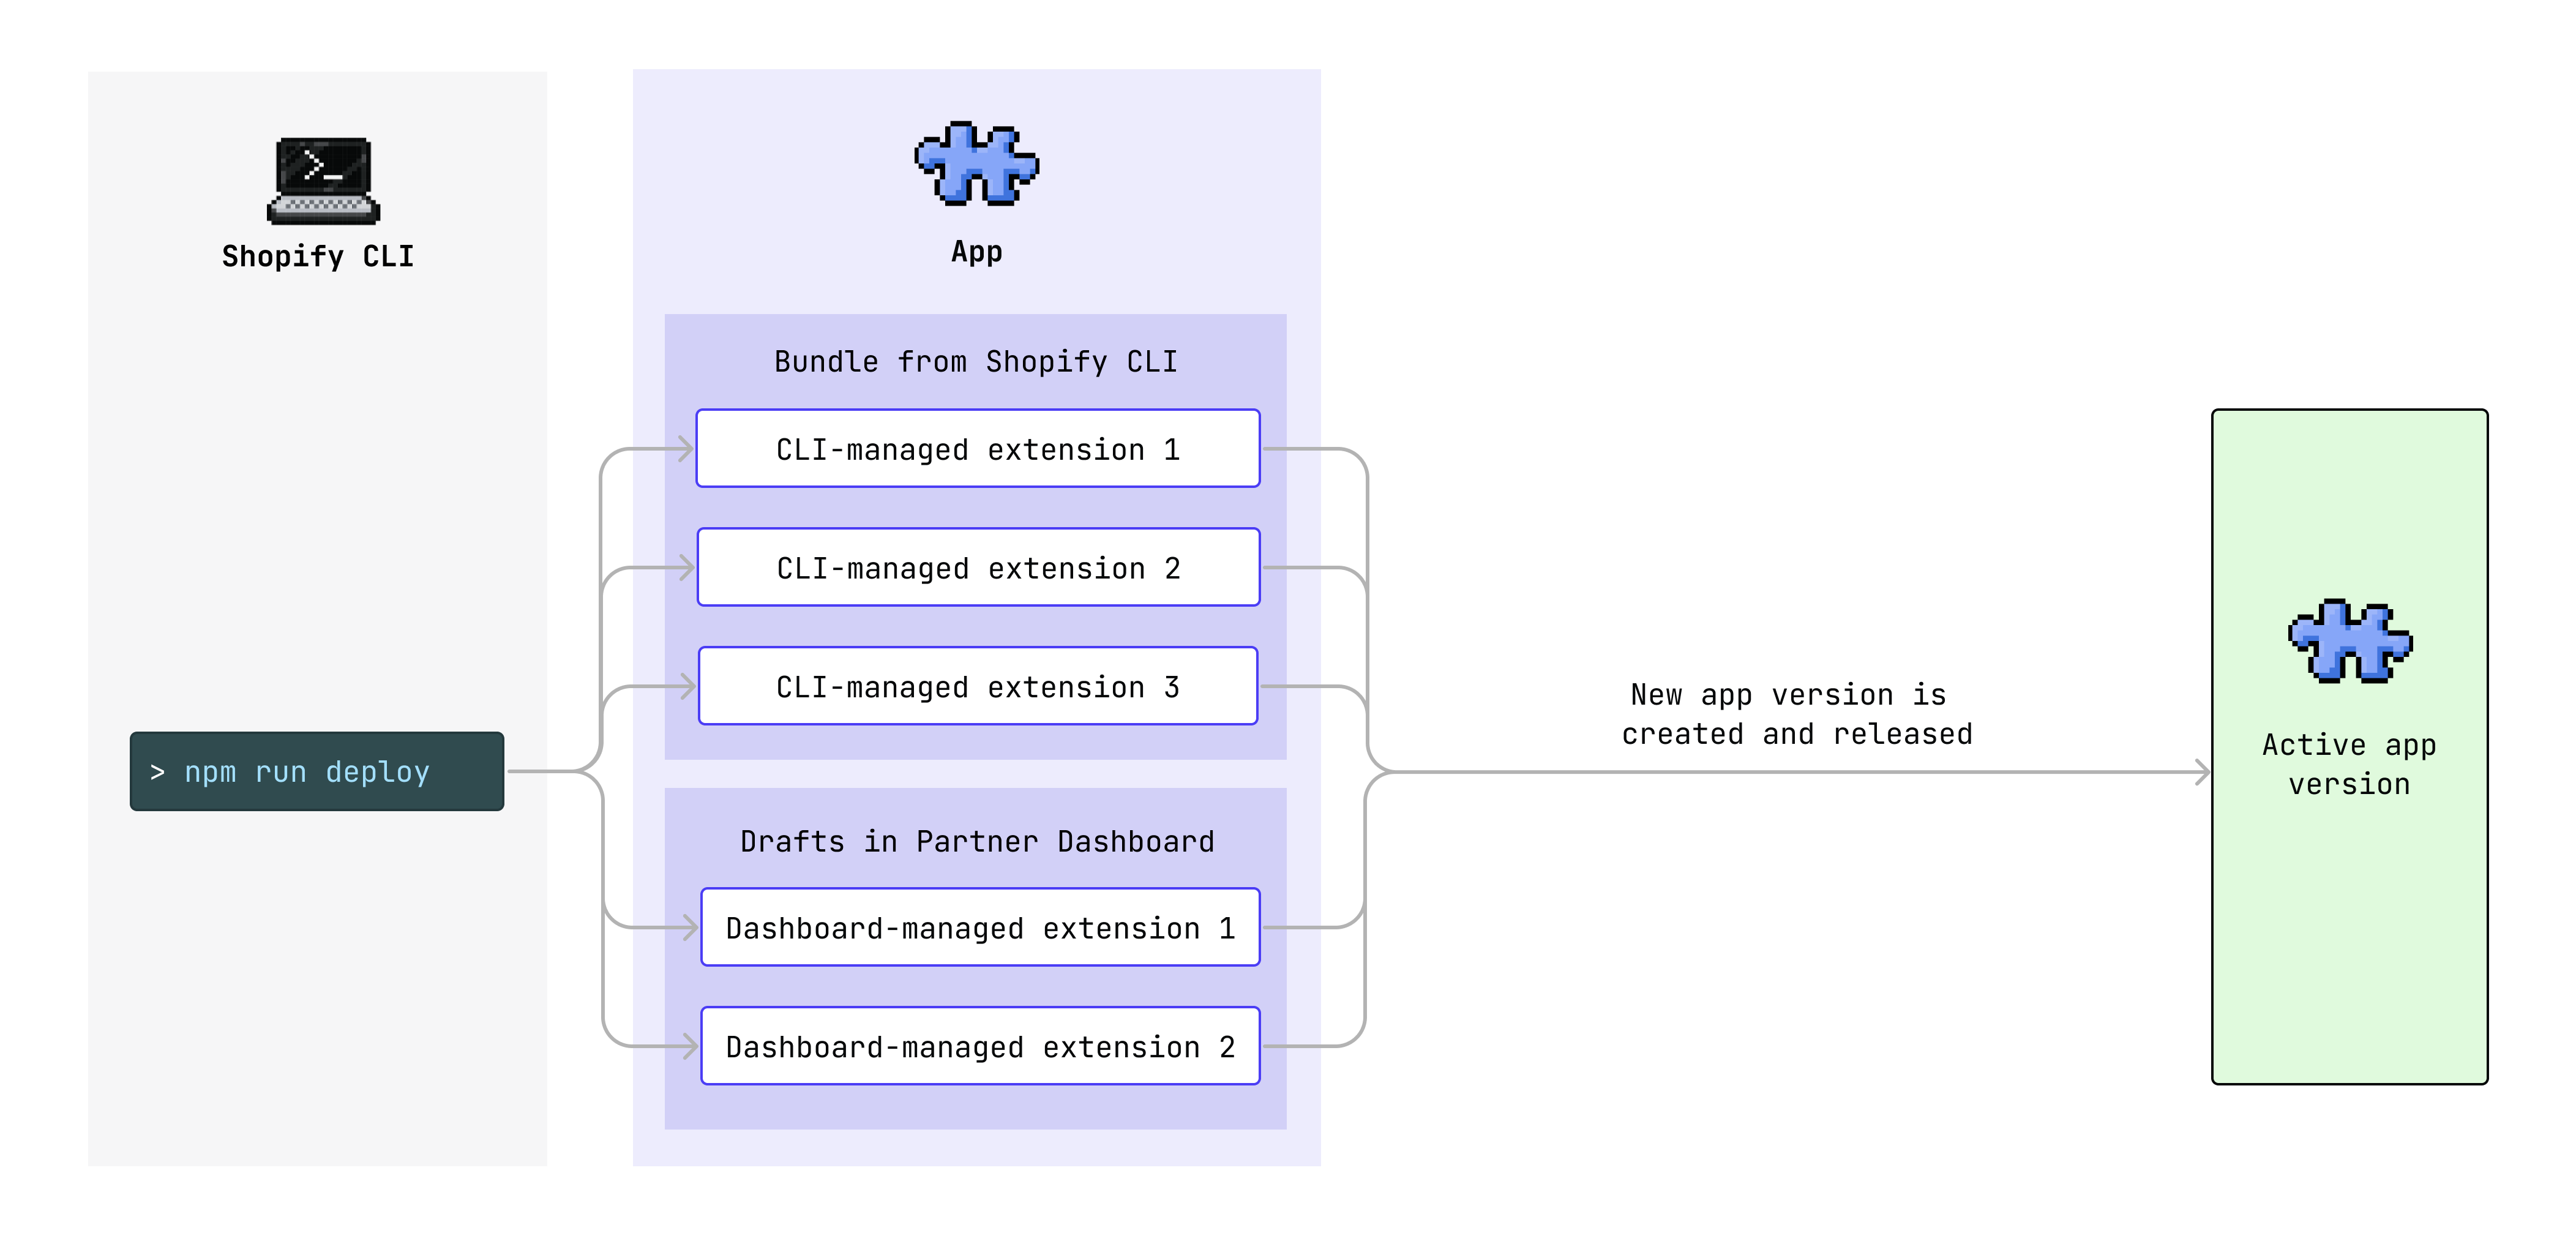 A diagram of the simplified deployment model. When the deploy command is run, an app version containing CLI-managed and dashboard-managed extensions is created and released.